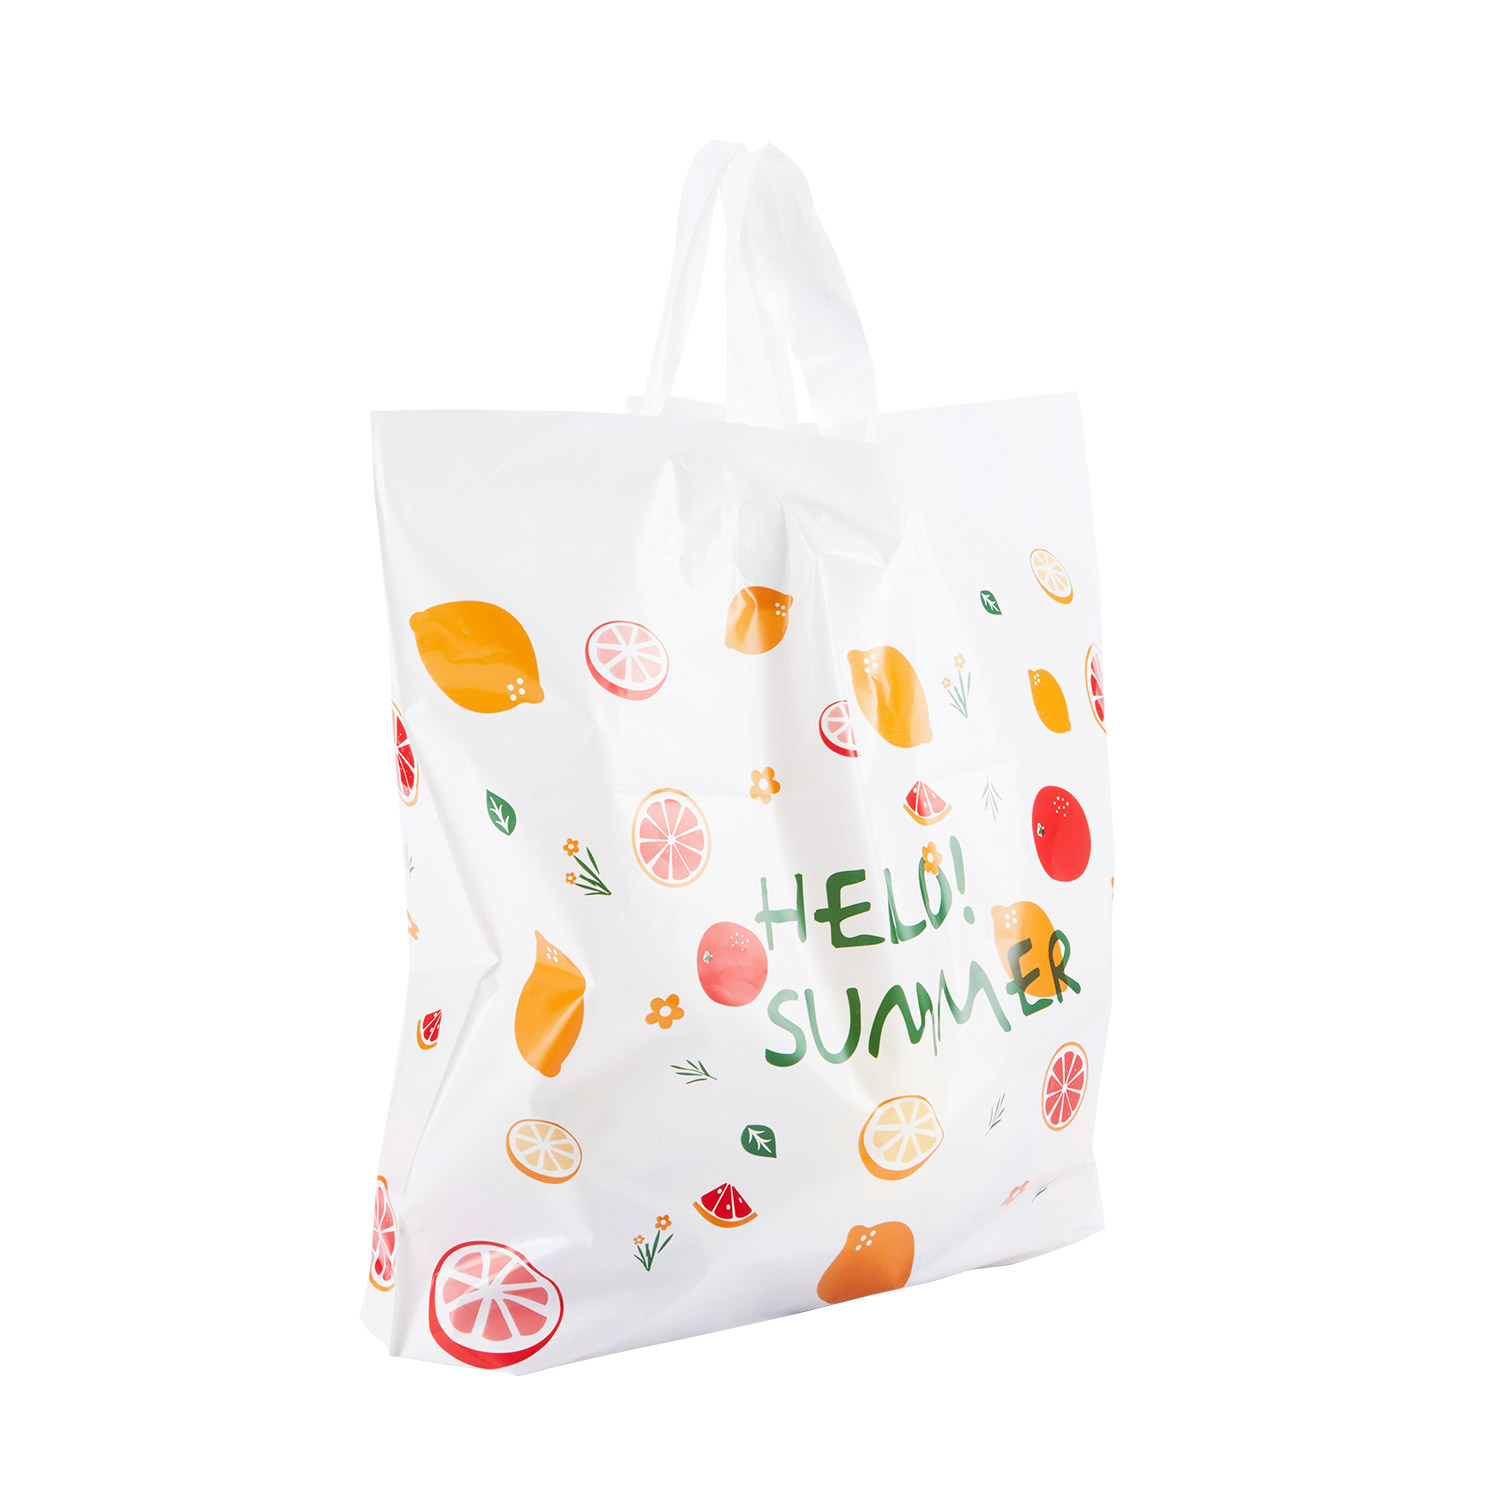 Soma Package Ltd Champions Sustainability with Biodegradable Plastic Bags